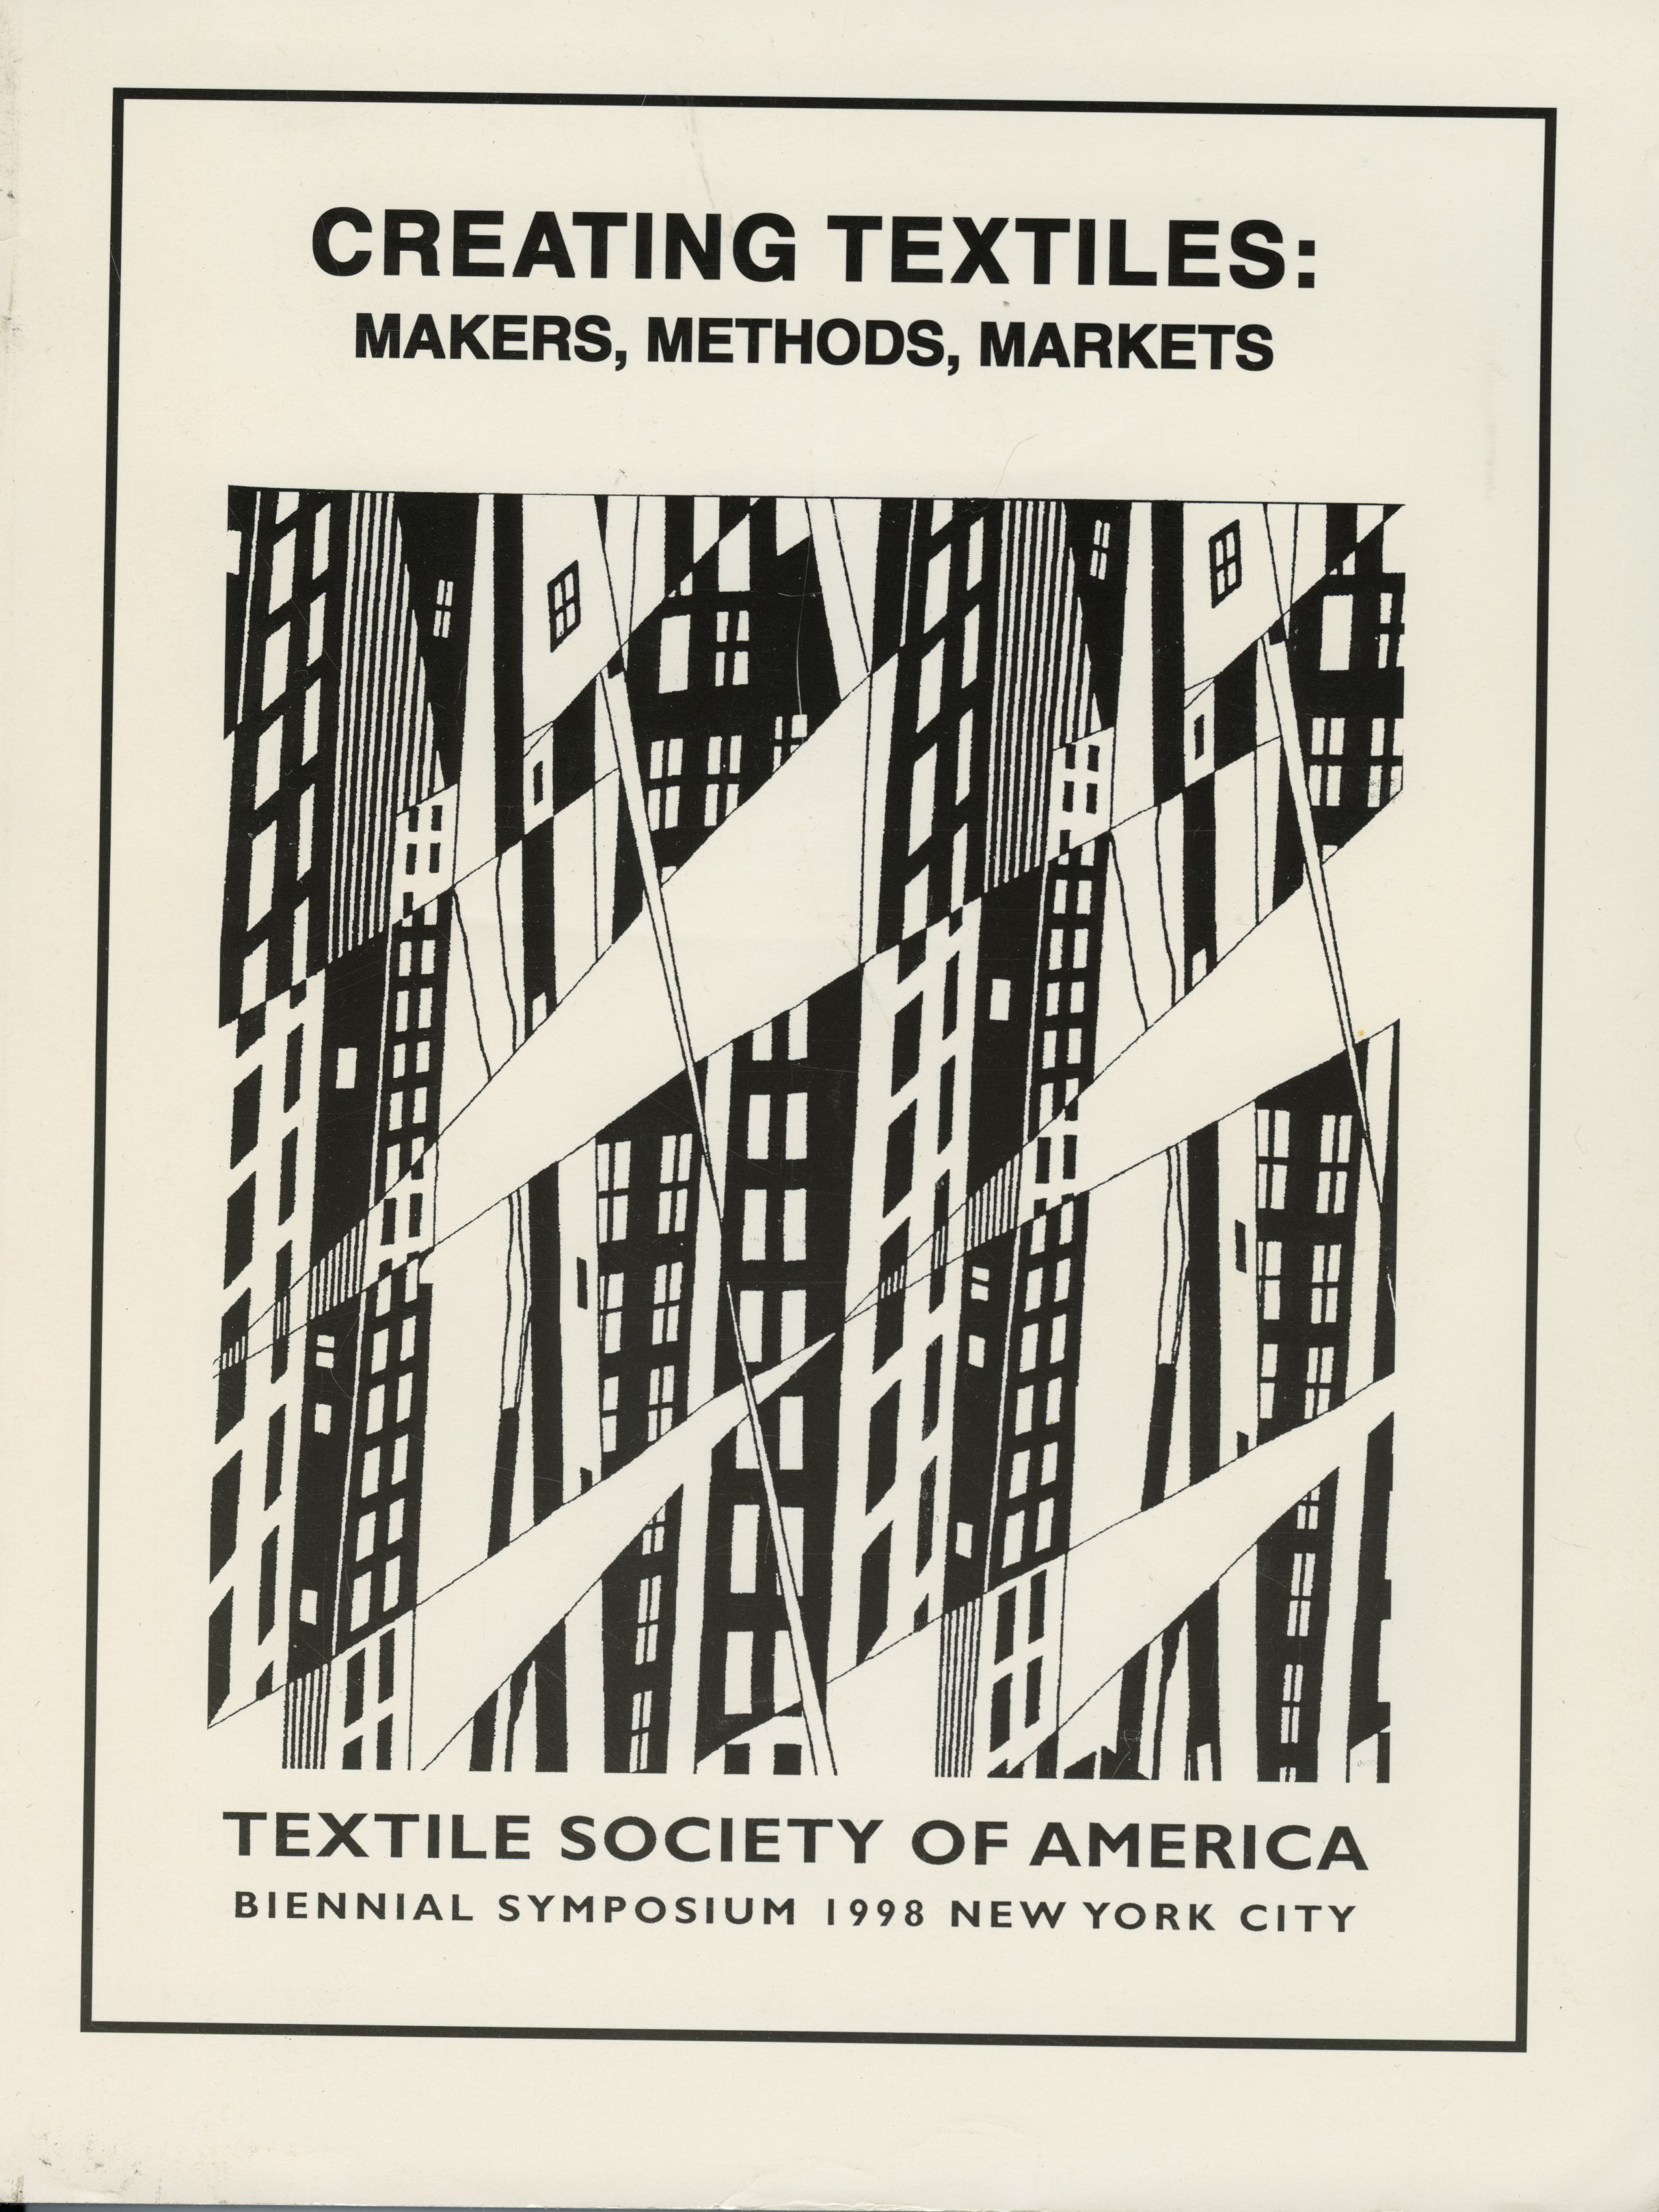 Creating Textiles: Makers, Methods, Markets. Textile Society of America Biennial Symposium 1998 New York City.